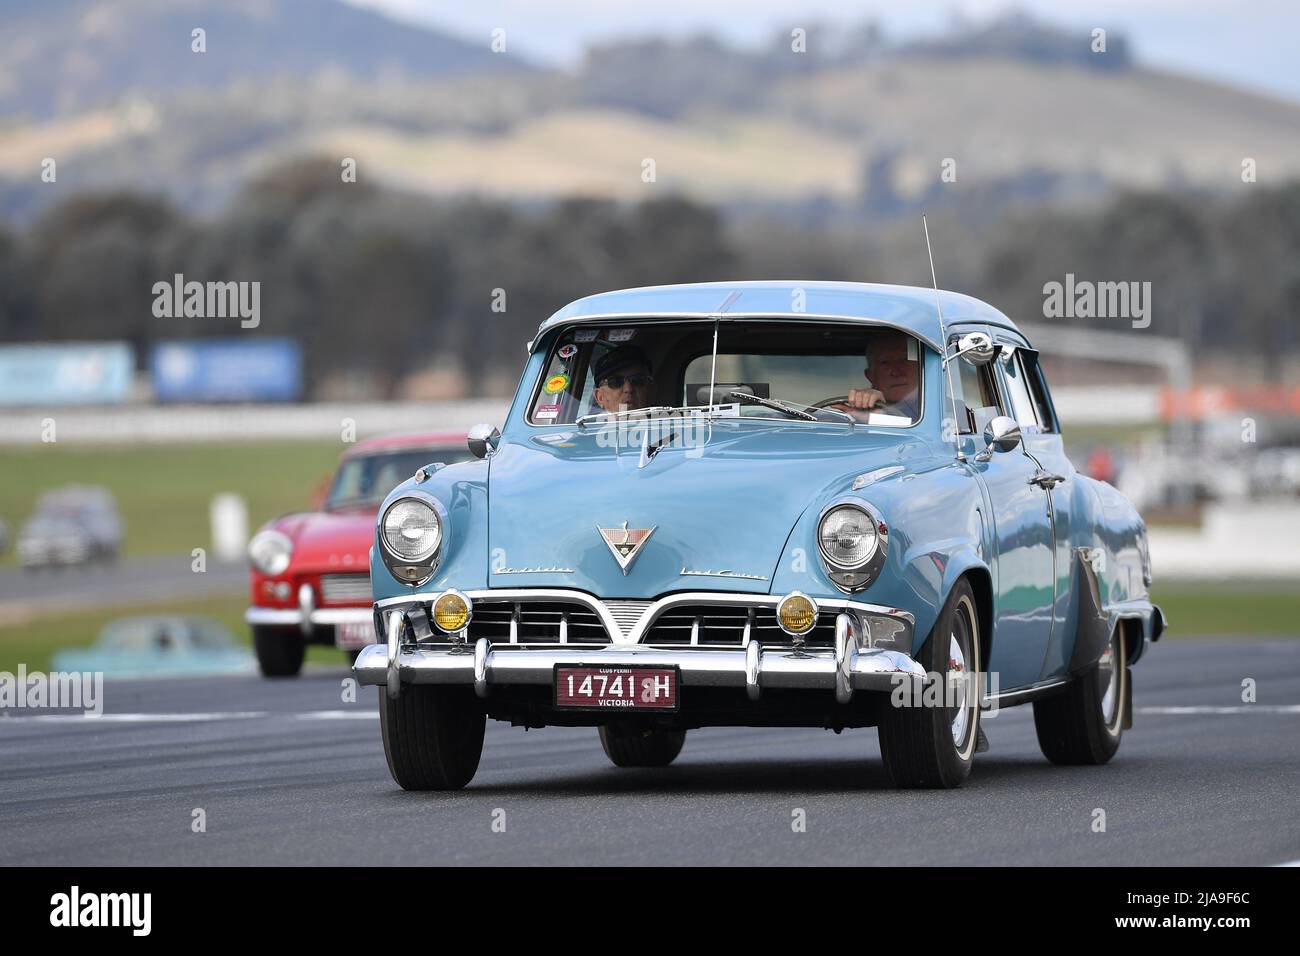 Winton, Australia. 29 May, 2022. A classic Studebaker Land Cruiser tours the Winton Race Circuit for the historic vehicle parade laps at Historic Winton, Australia's largest and most popular all-historic motor race meeting. Credit: Karl Phillipson/Optikal/Alamy Live News Stock Photo